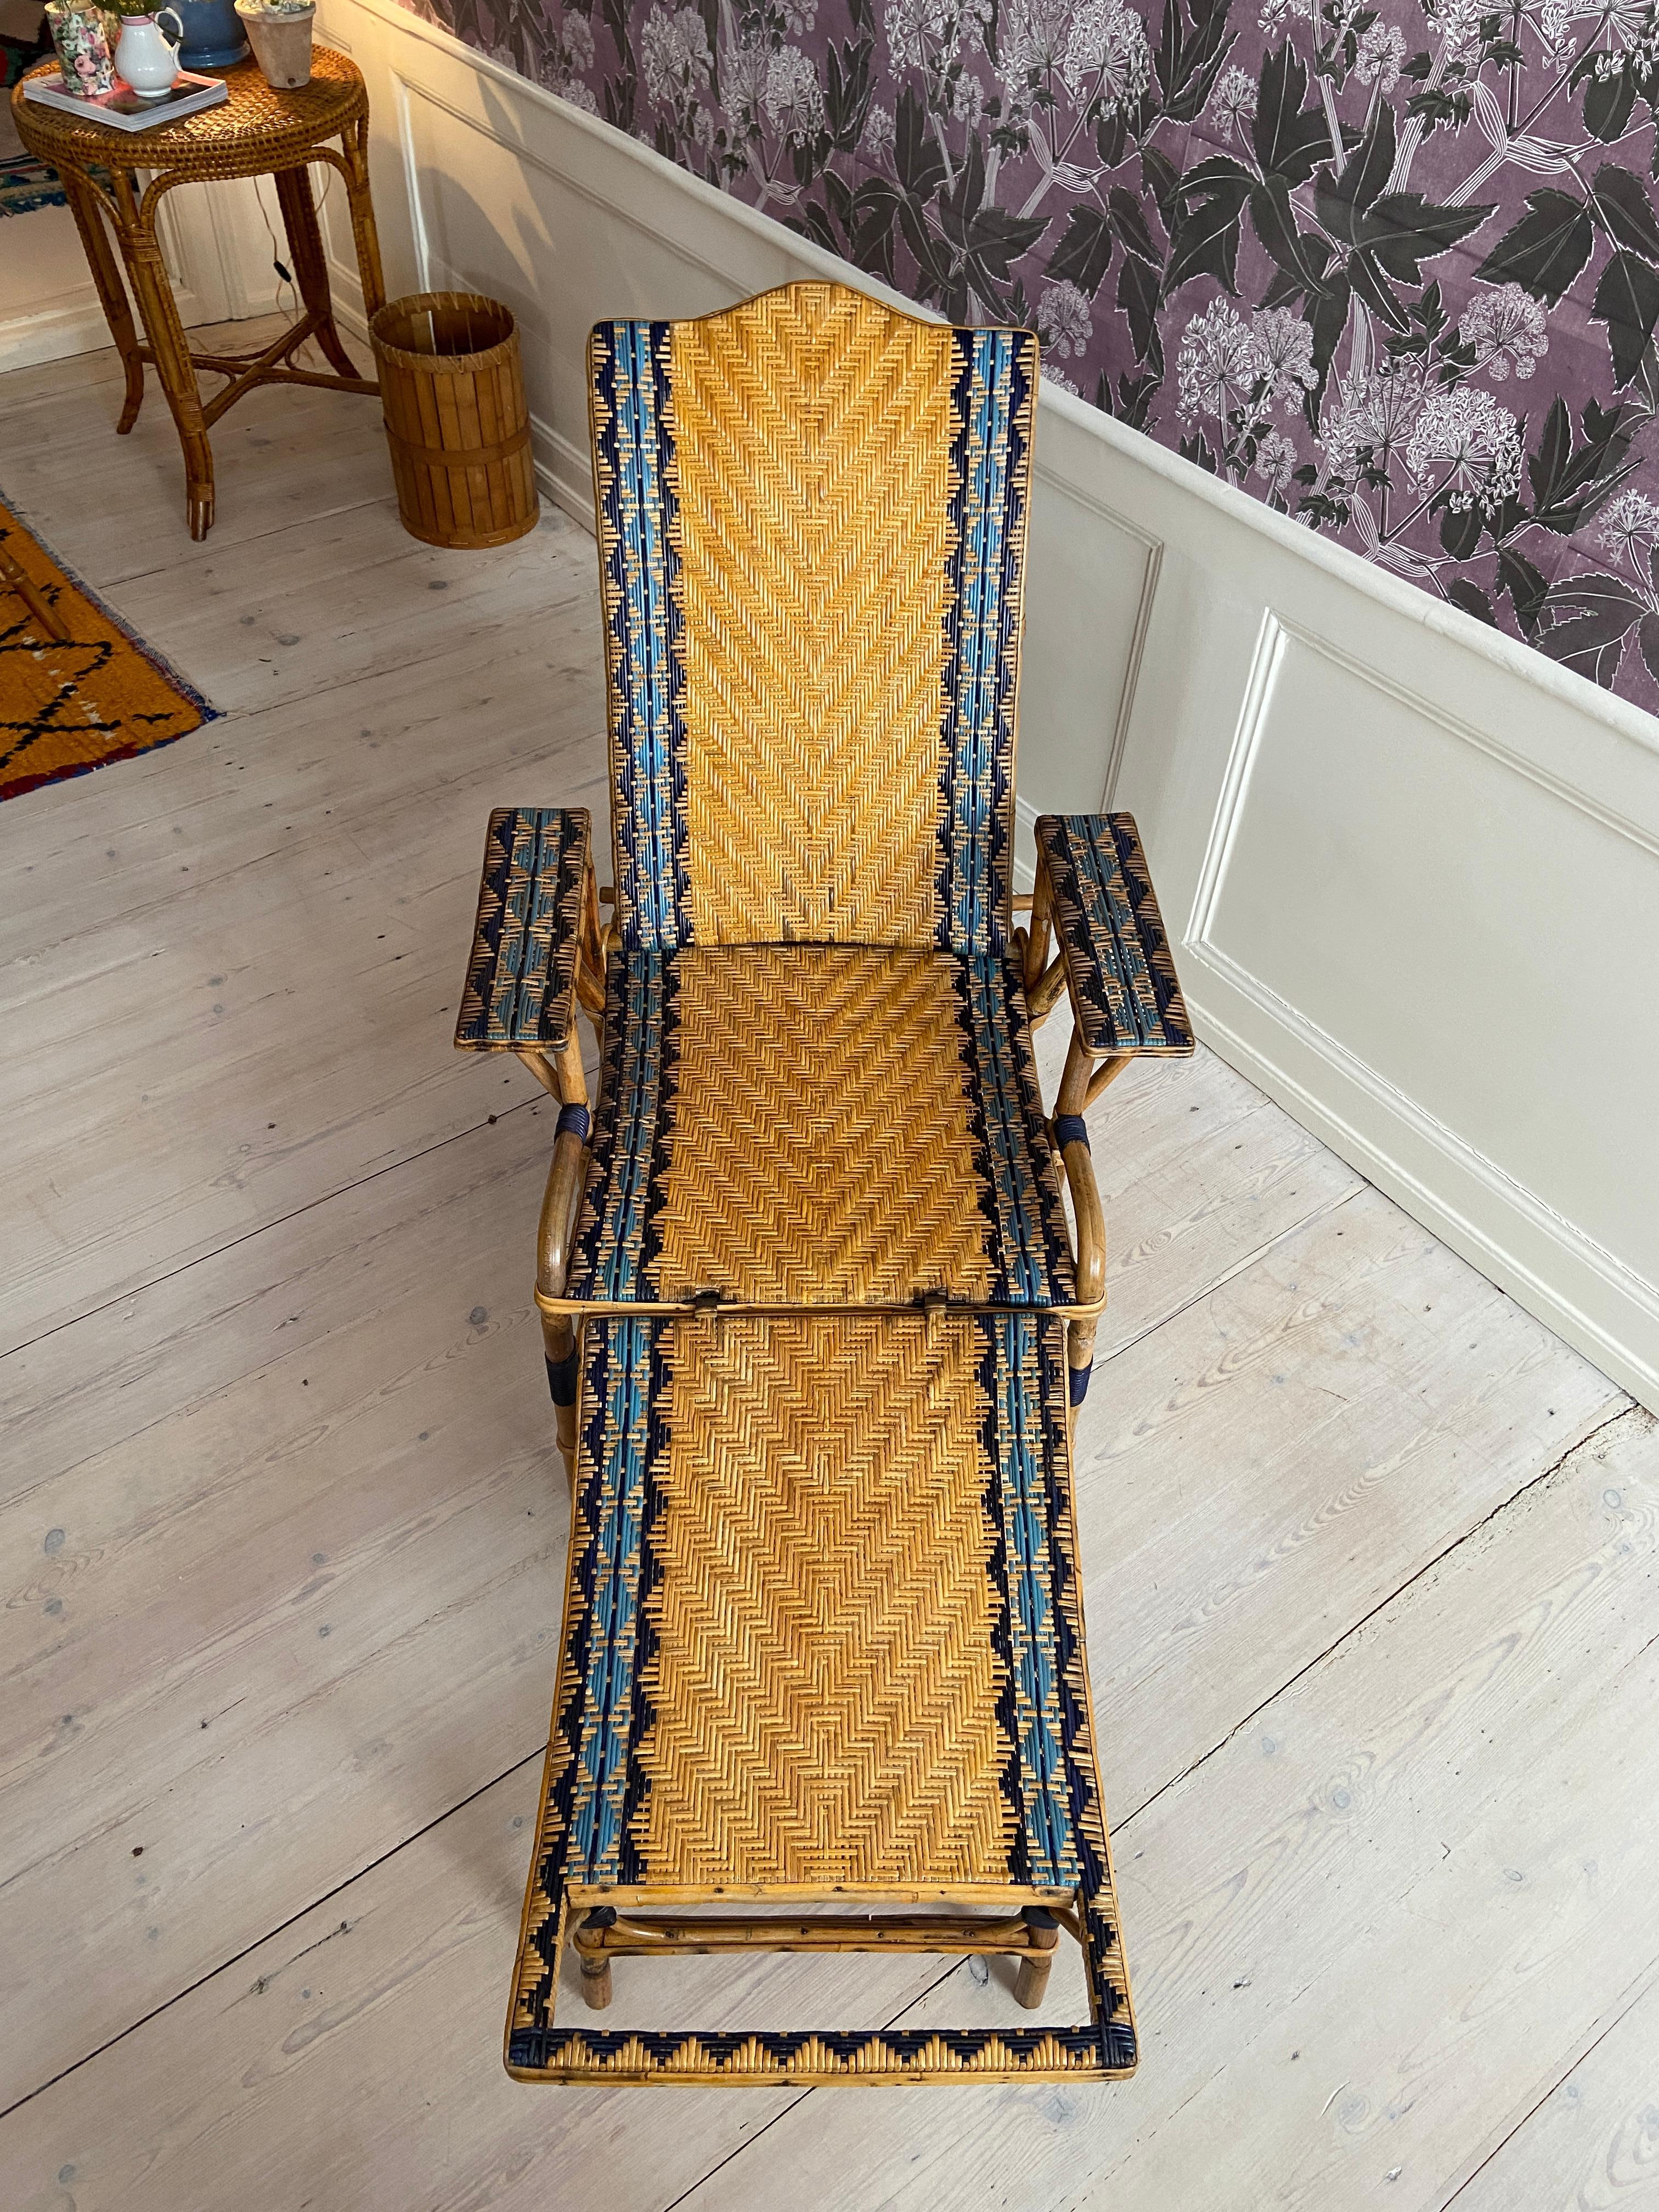 French Vintage Rattan Chaise Longue with Blue and Black Woven Details, France, 1930's